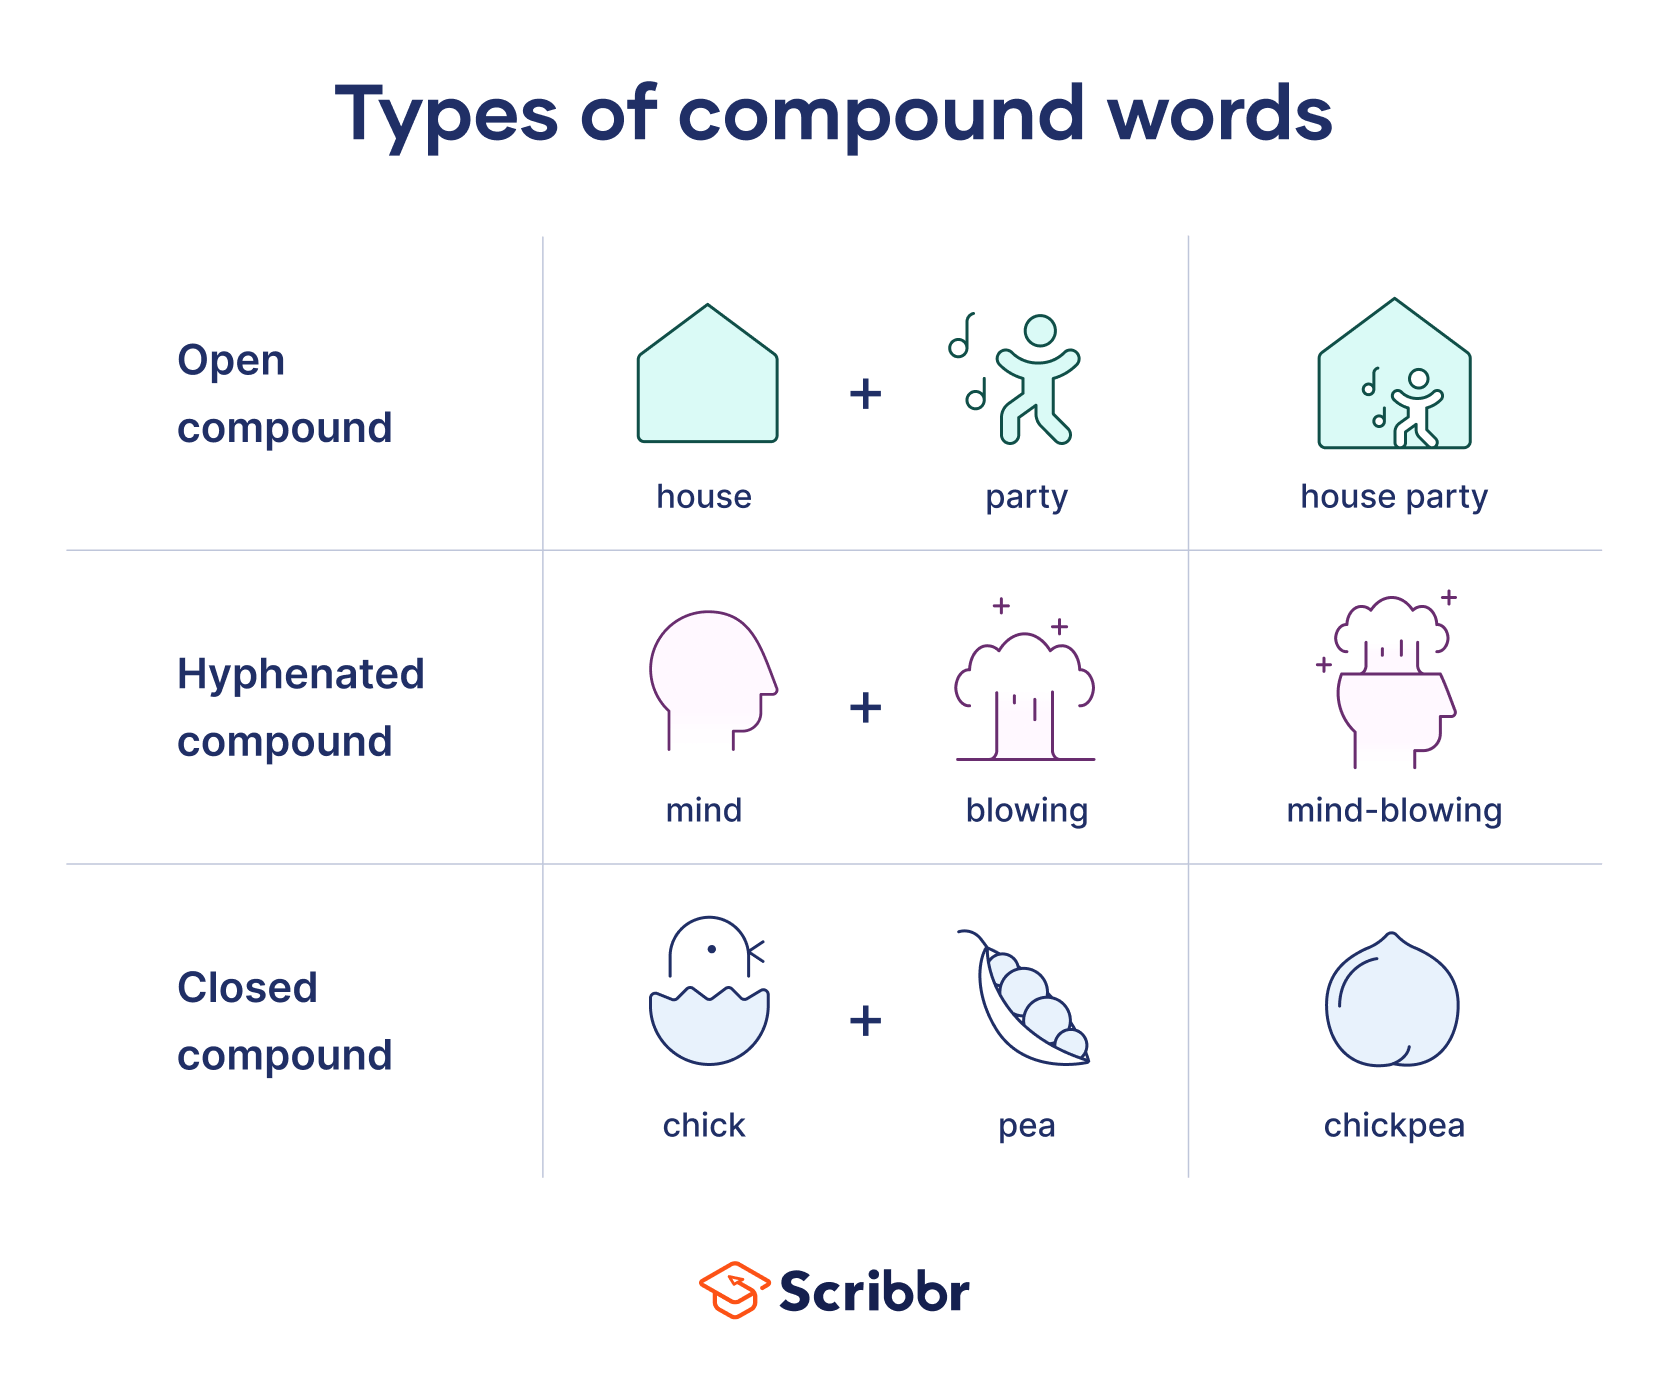 Types of compound words